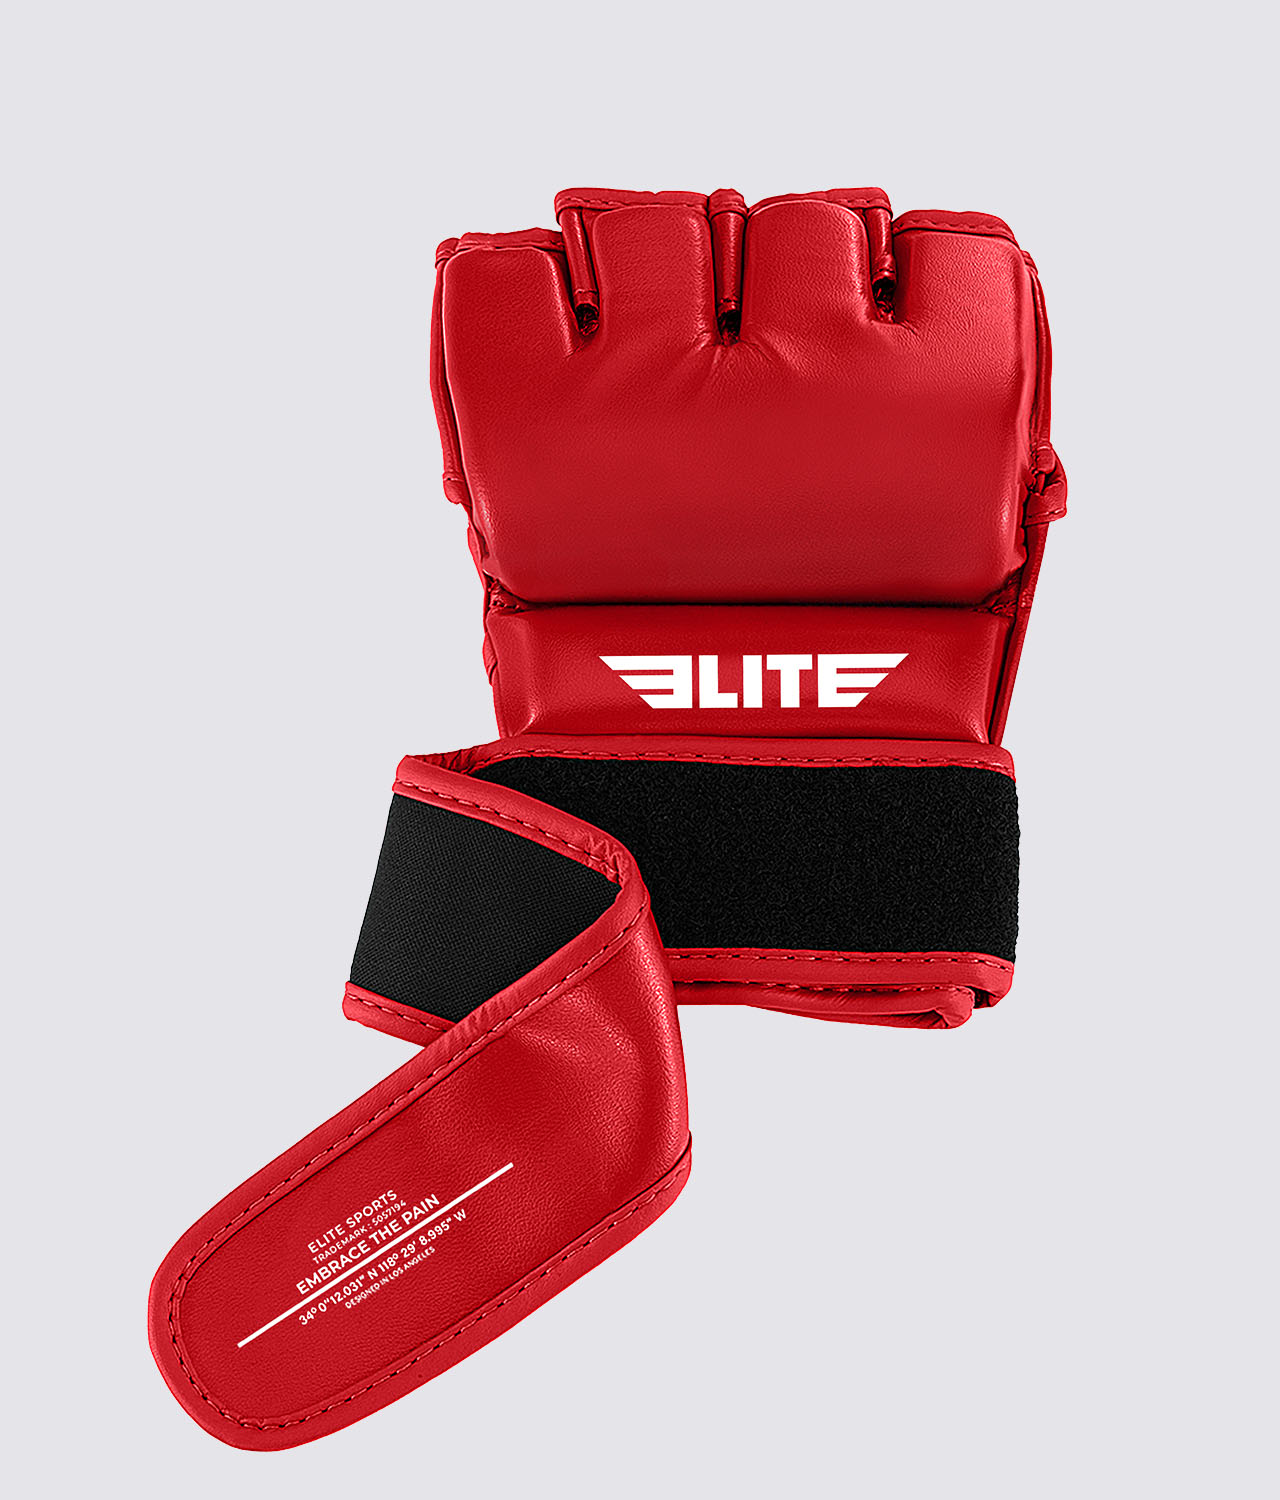 Adults' Essential Red MMA Half Mitts Grappling Gloves